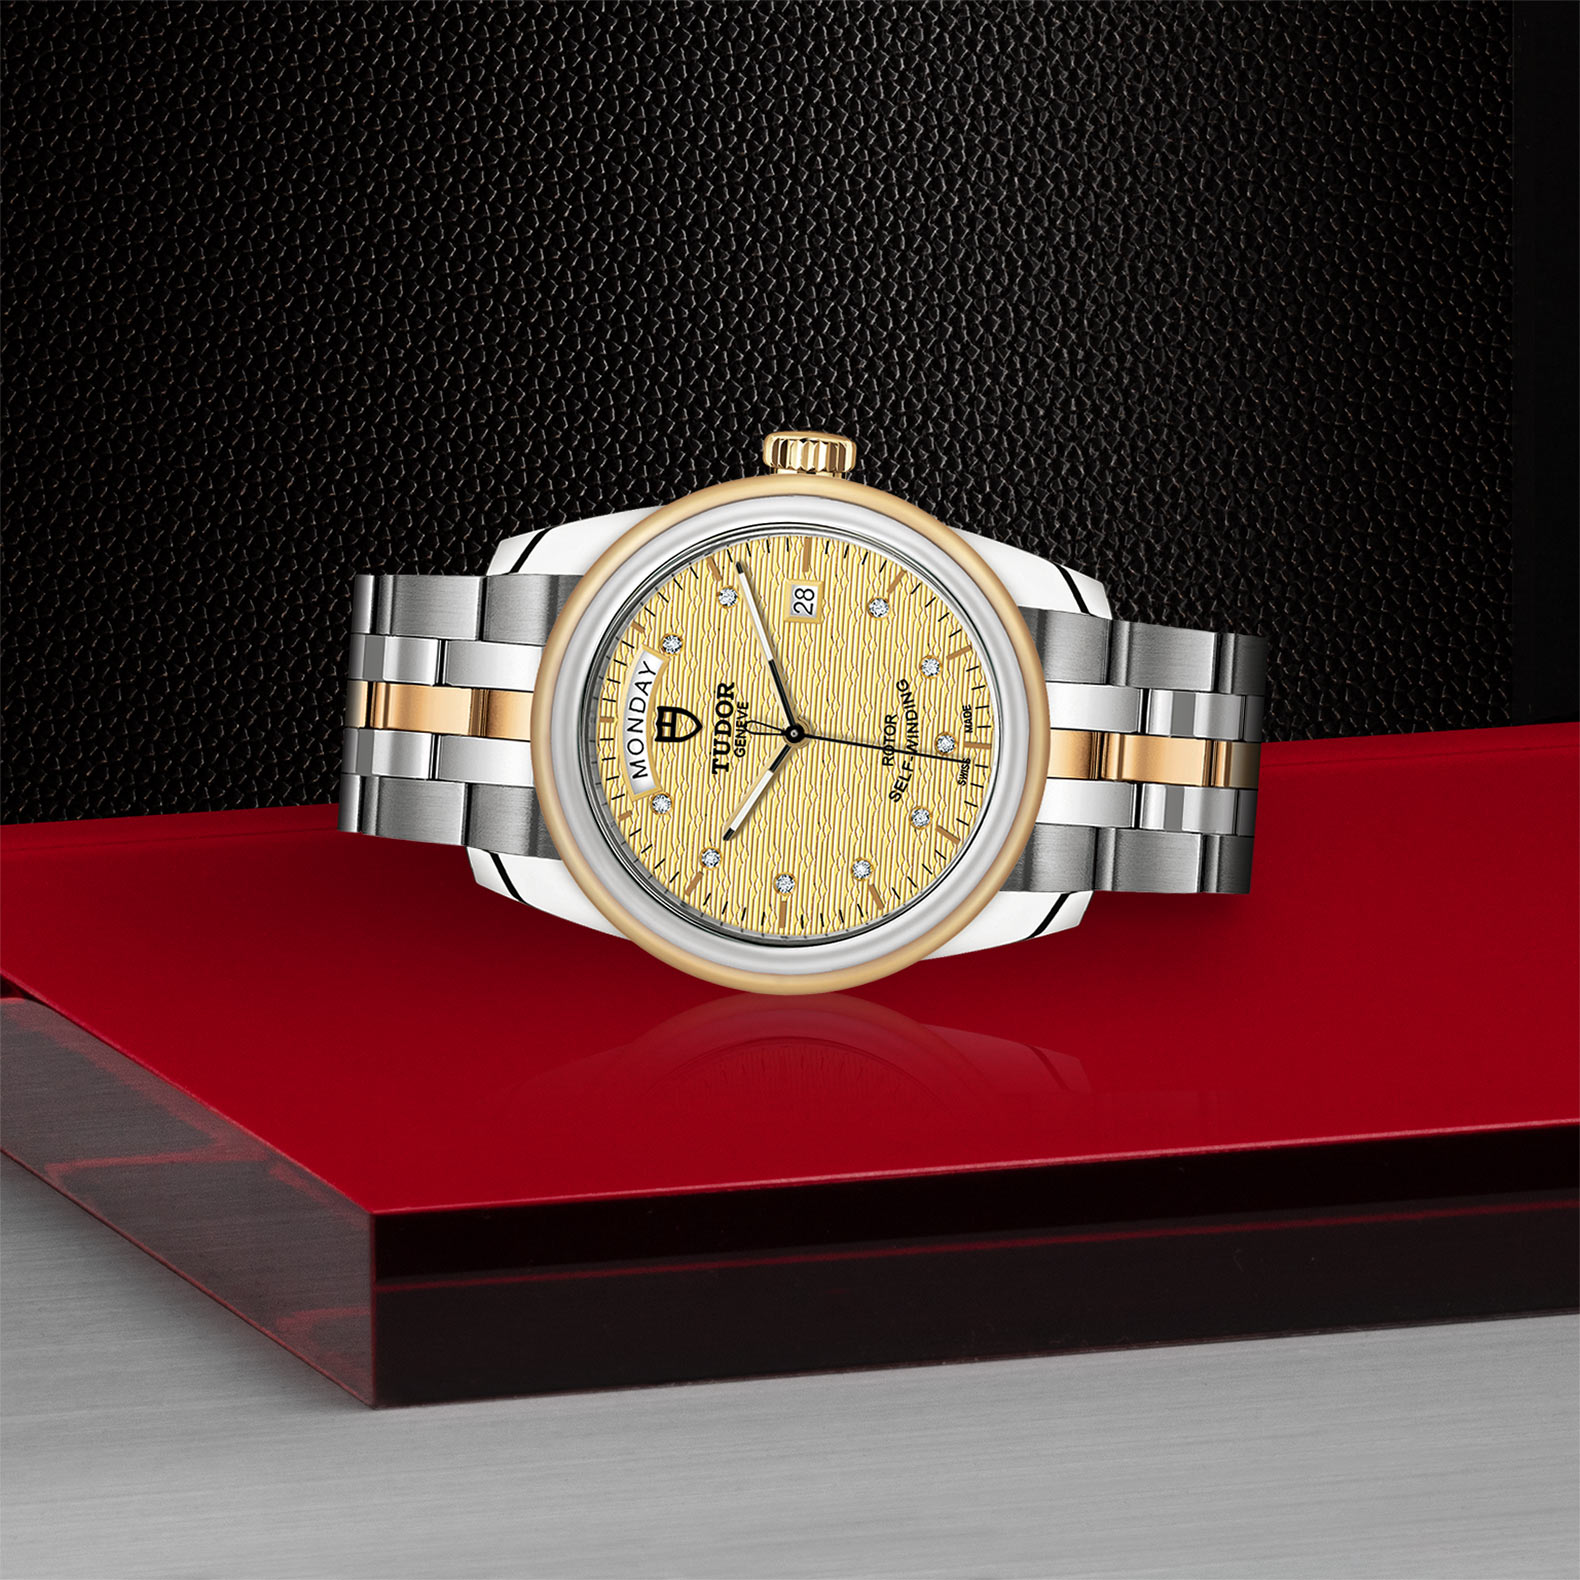 Tudor Glamour Date+Day M56003-0004